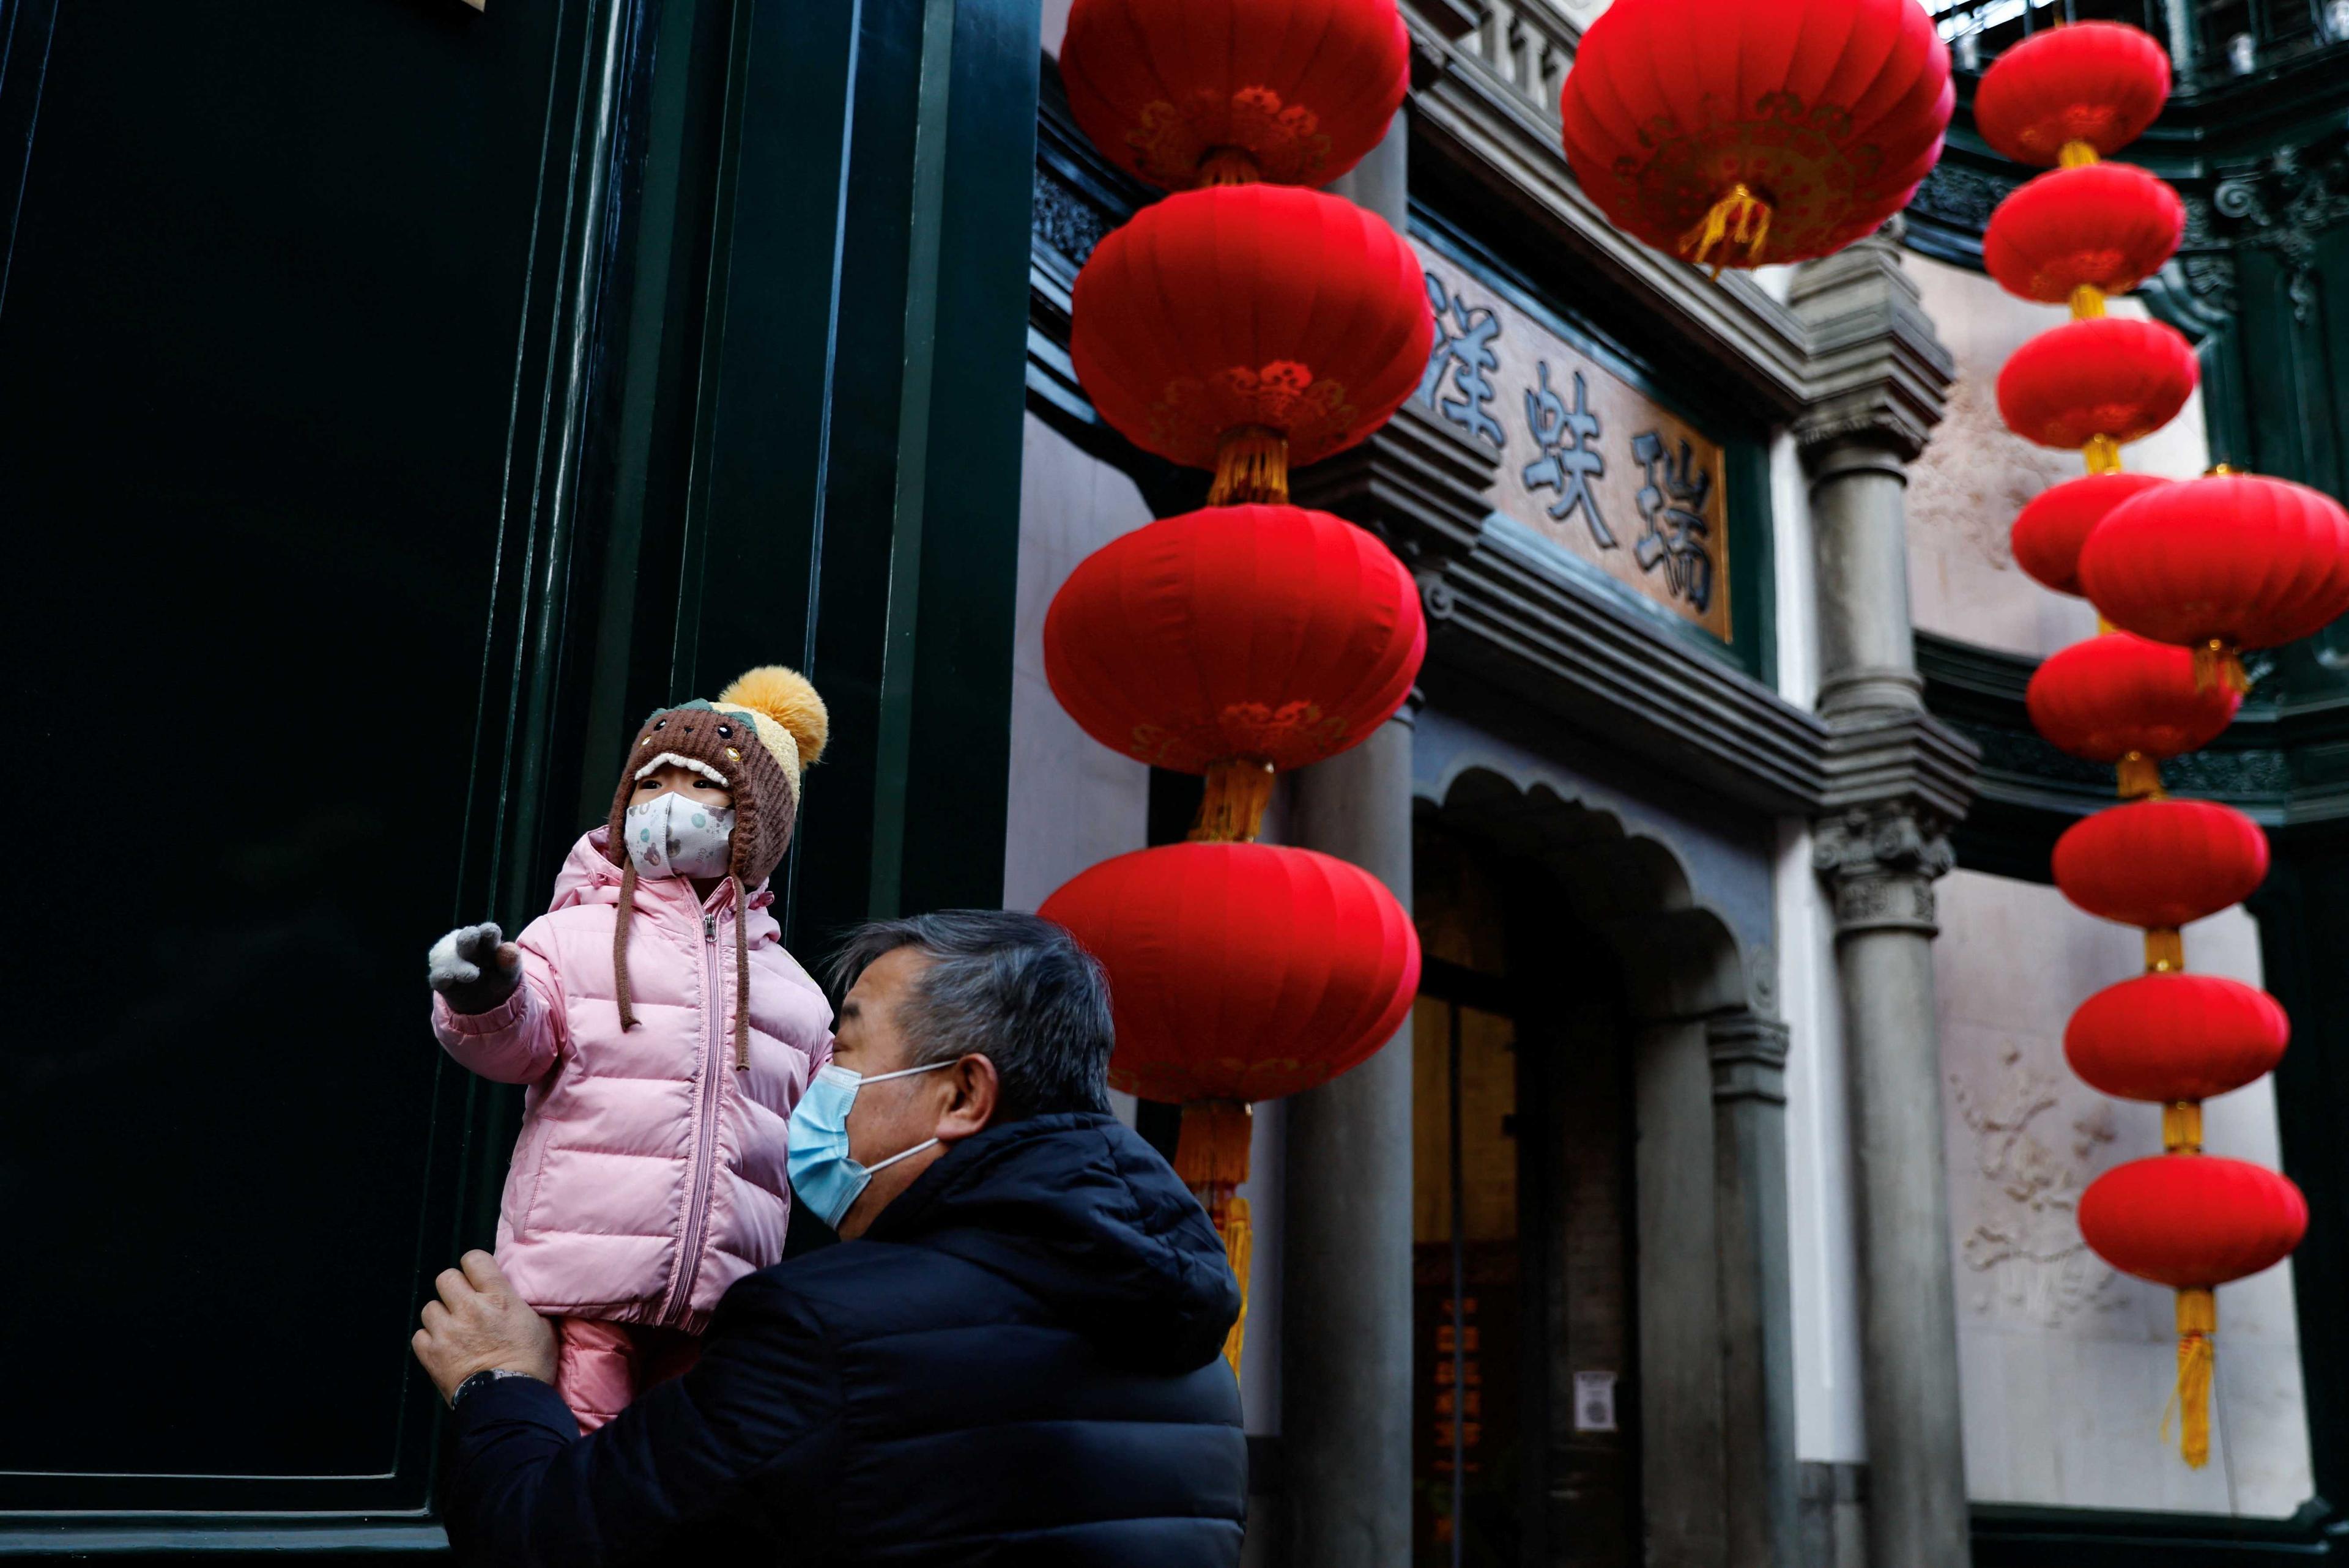 An elderly person holds a child near lanterns decorating a shop ahead of the Chinese Lunar New Year, in Beijing, China, Jan 15. Photo: Reuters